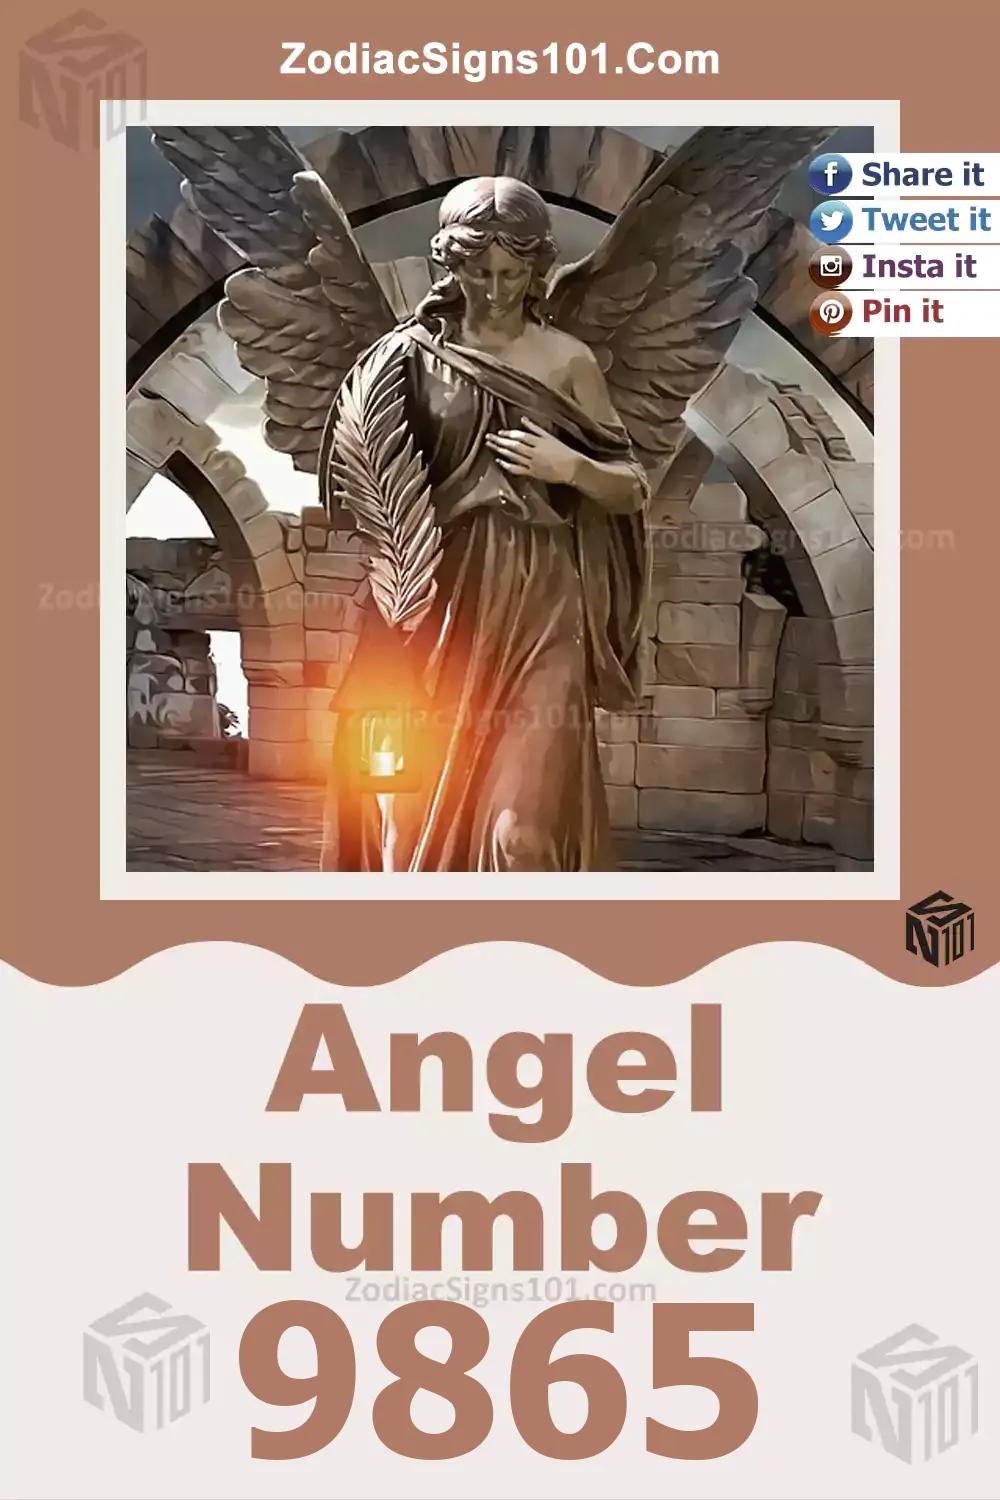 9865 Angel Number Meaning